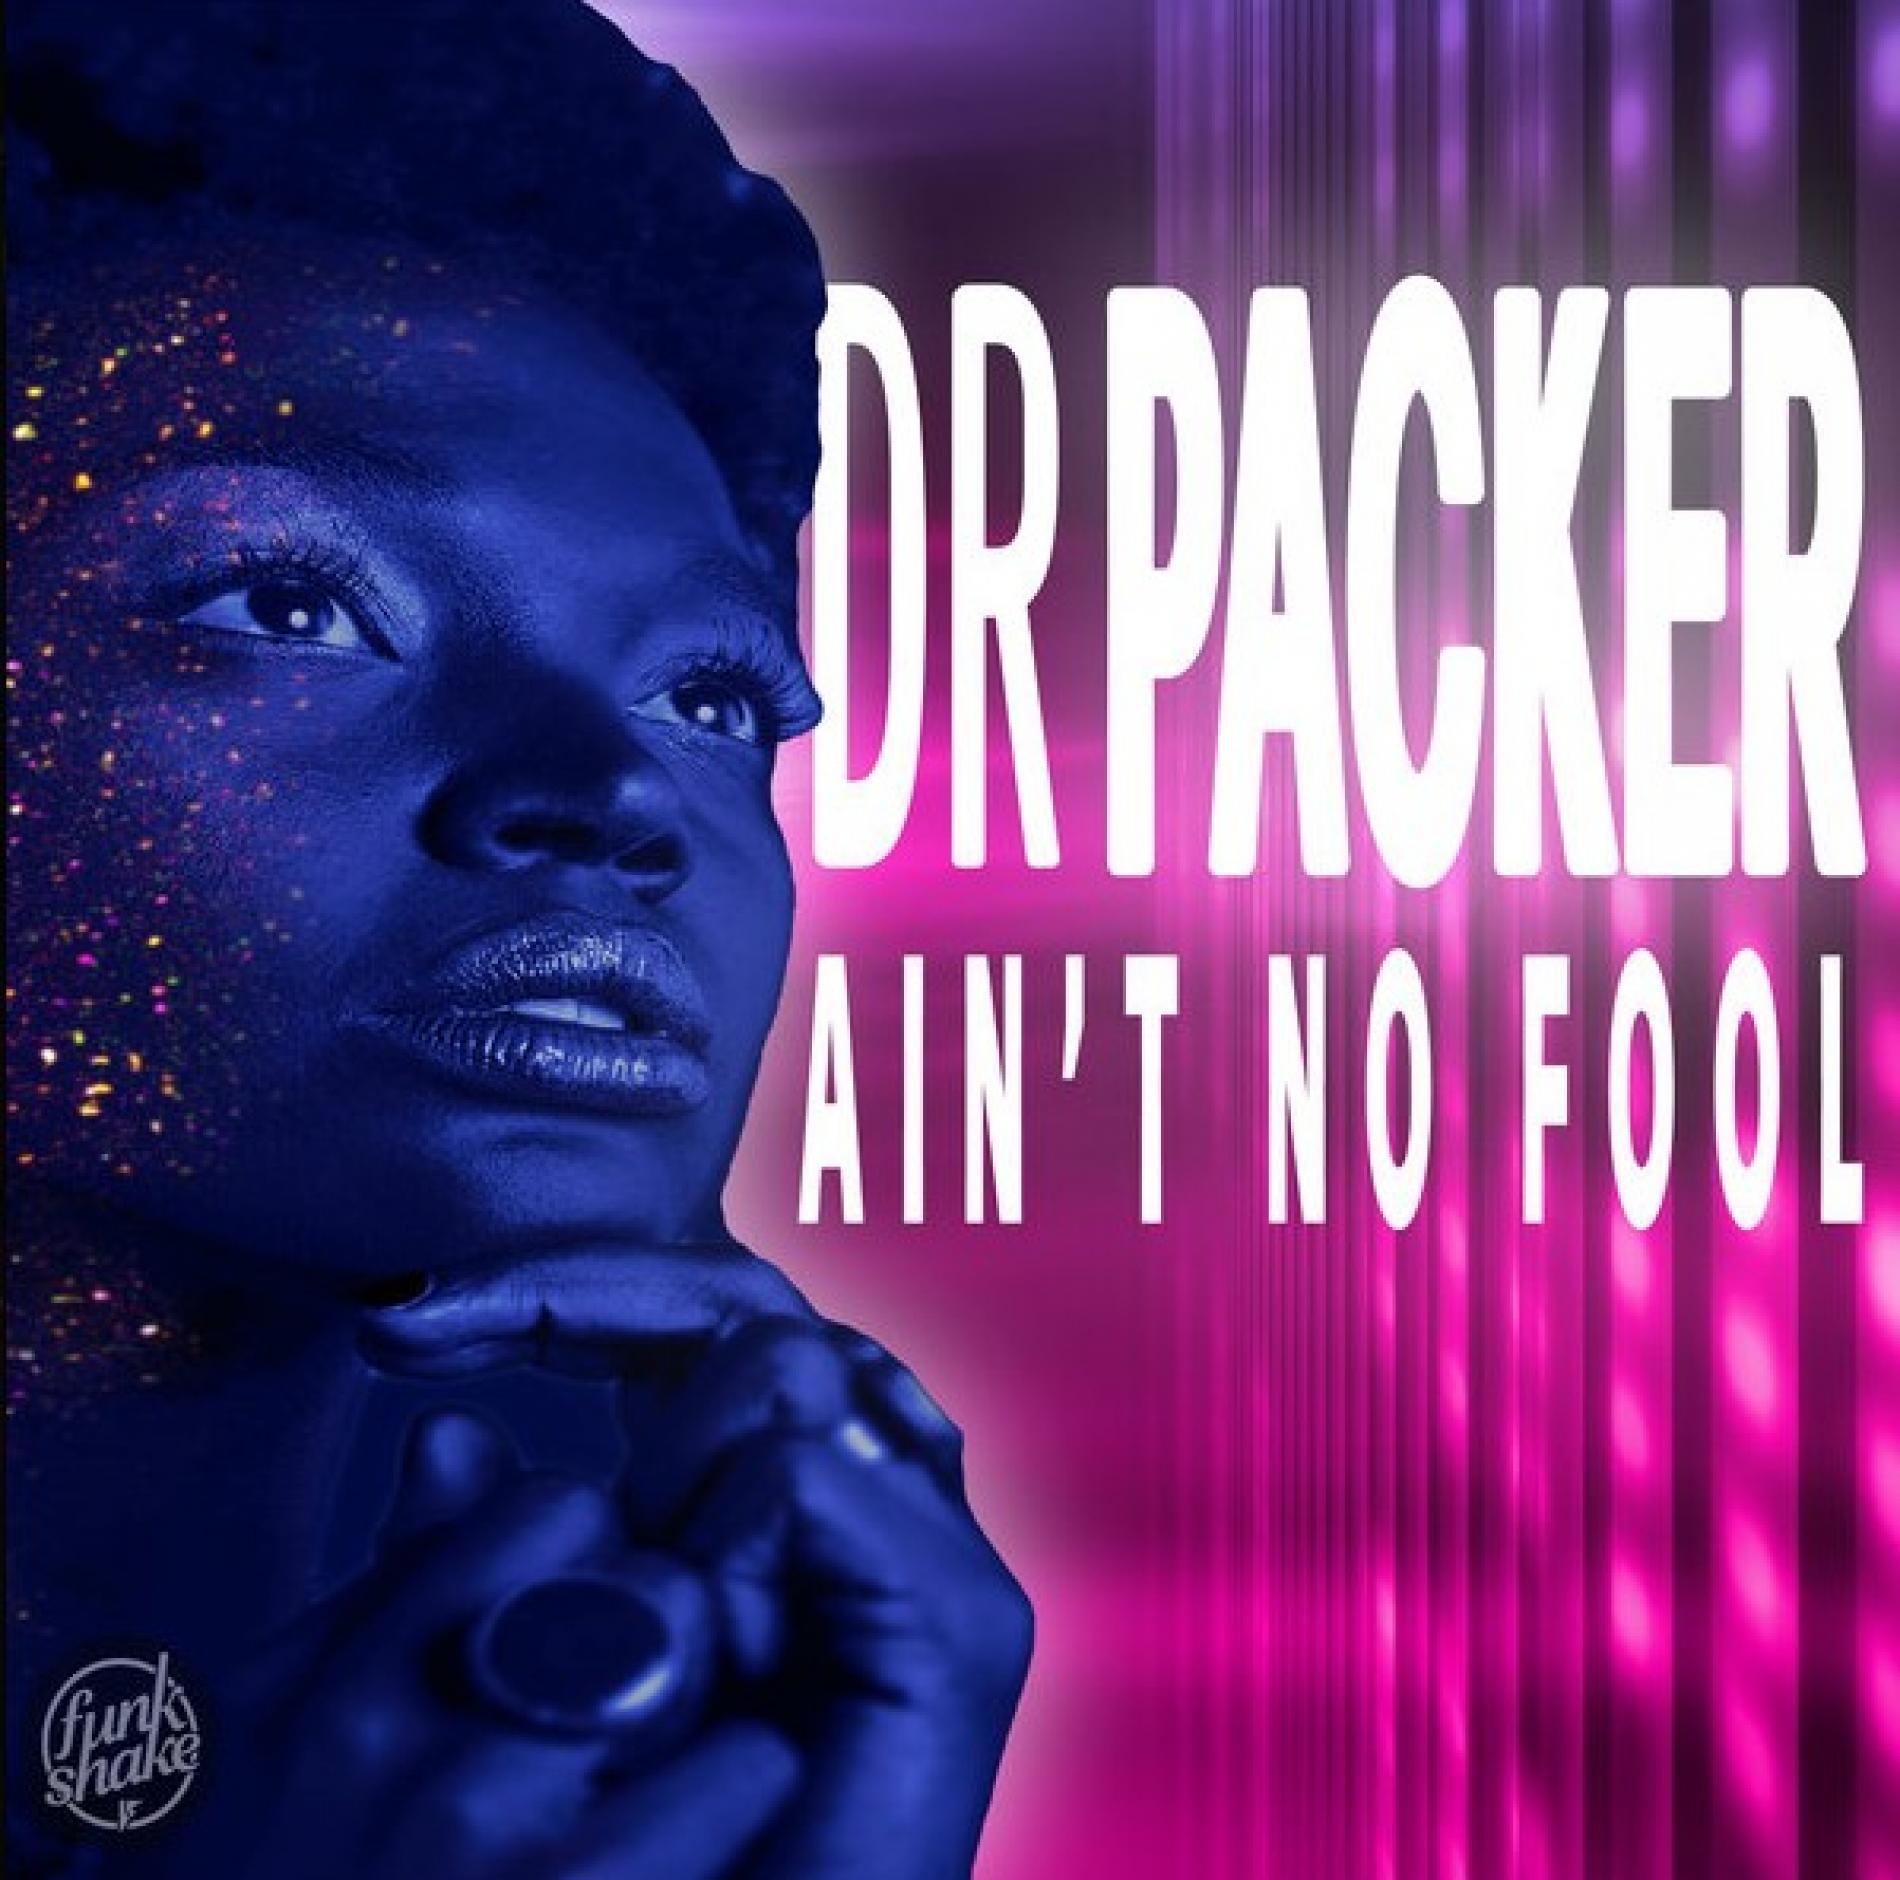 New Music : Dr Packer – Ain’t No Fool